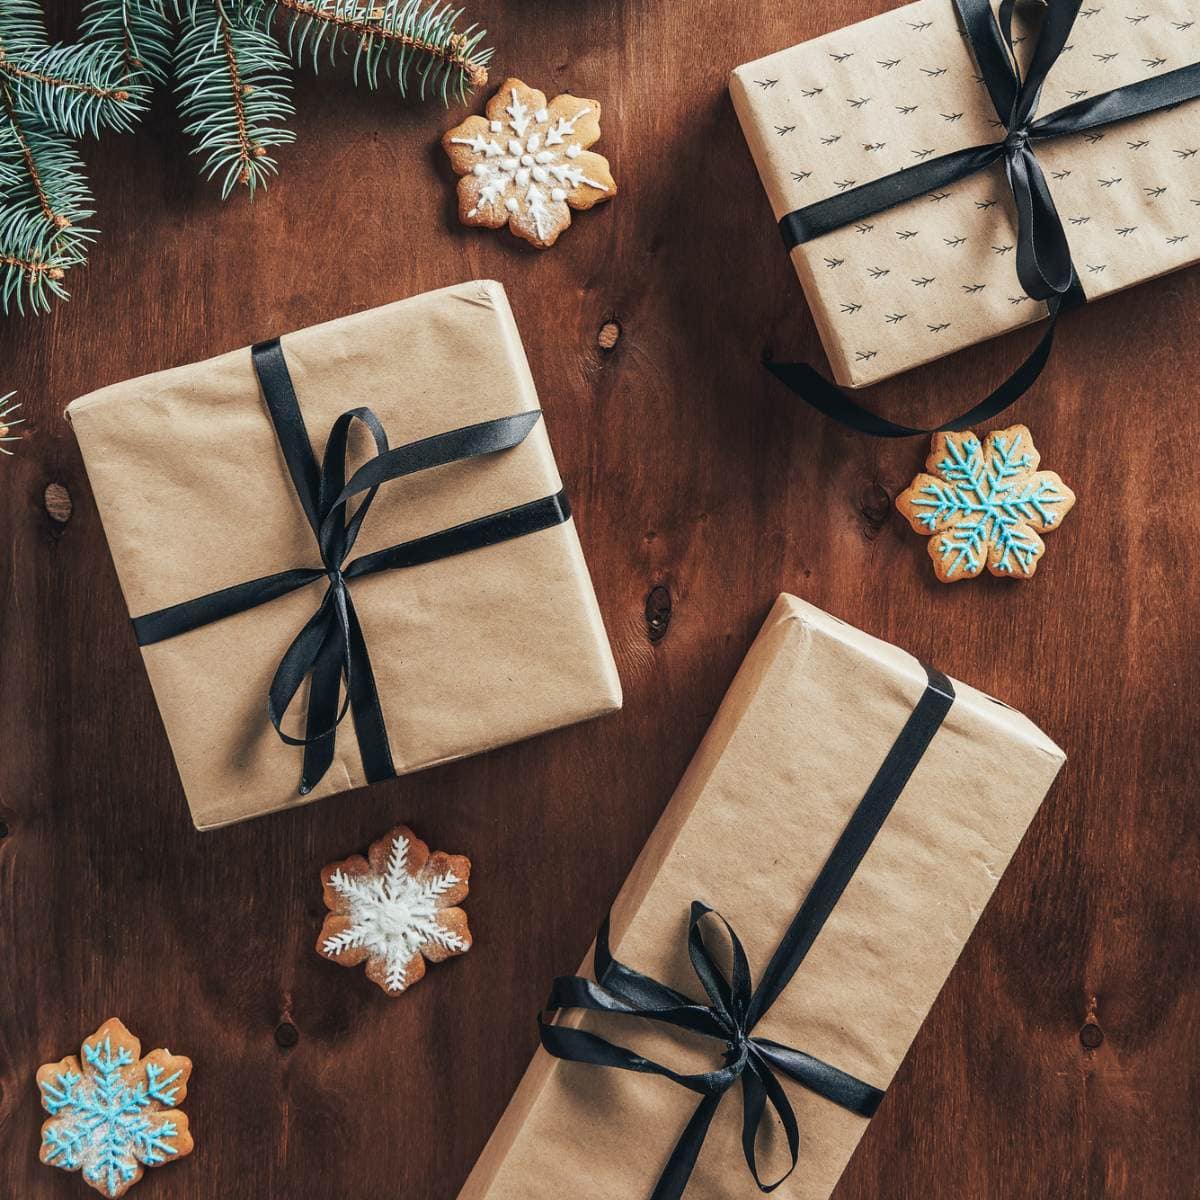 Christmas presents wrapped in brown paper on a wooden table.